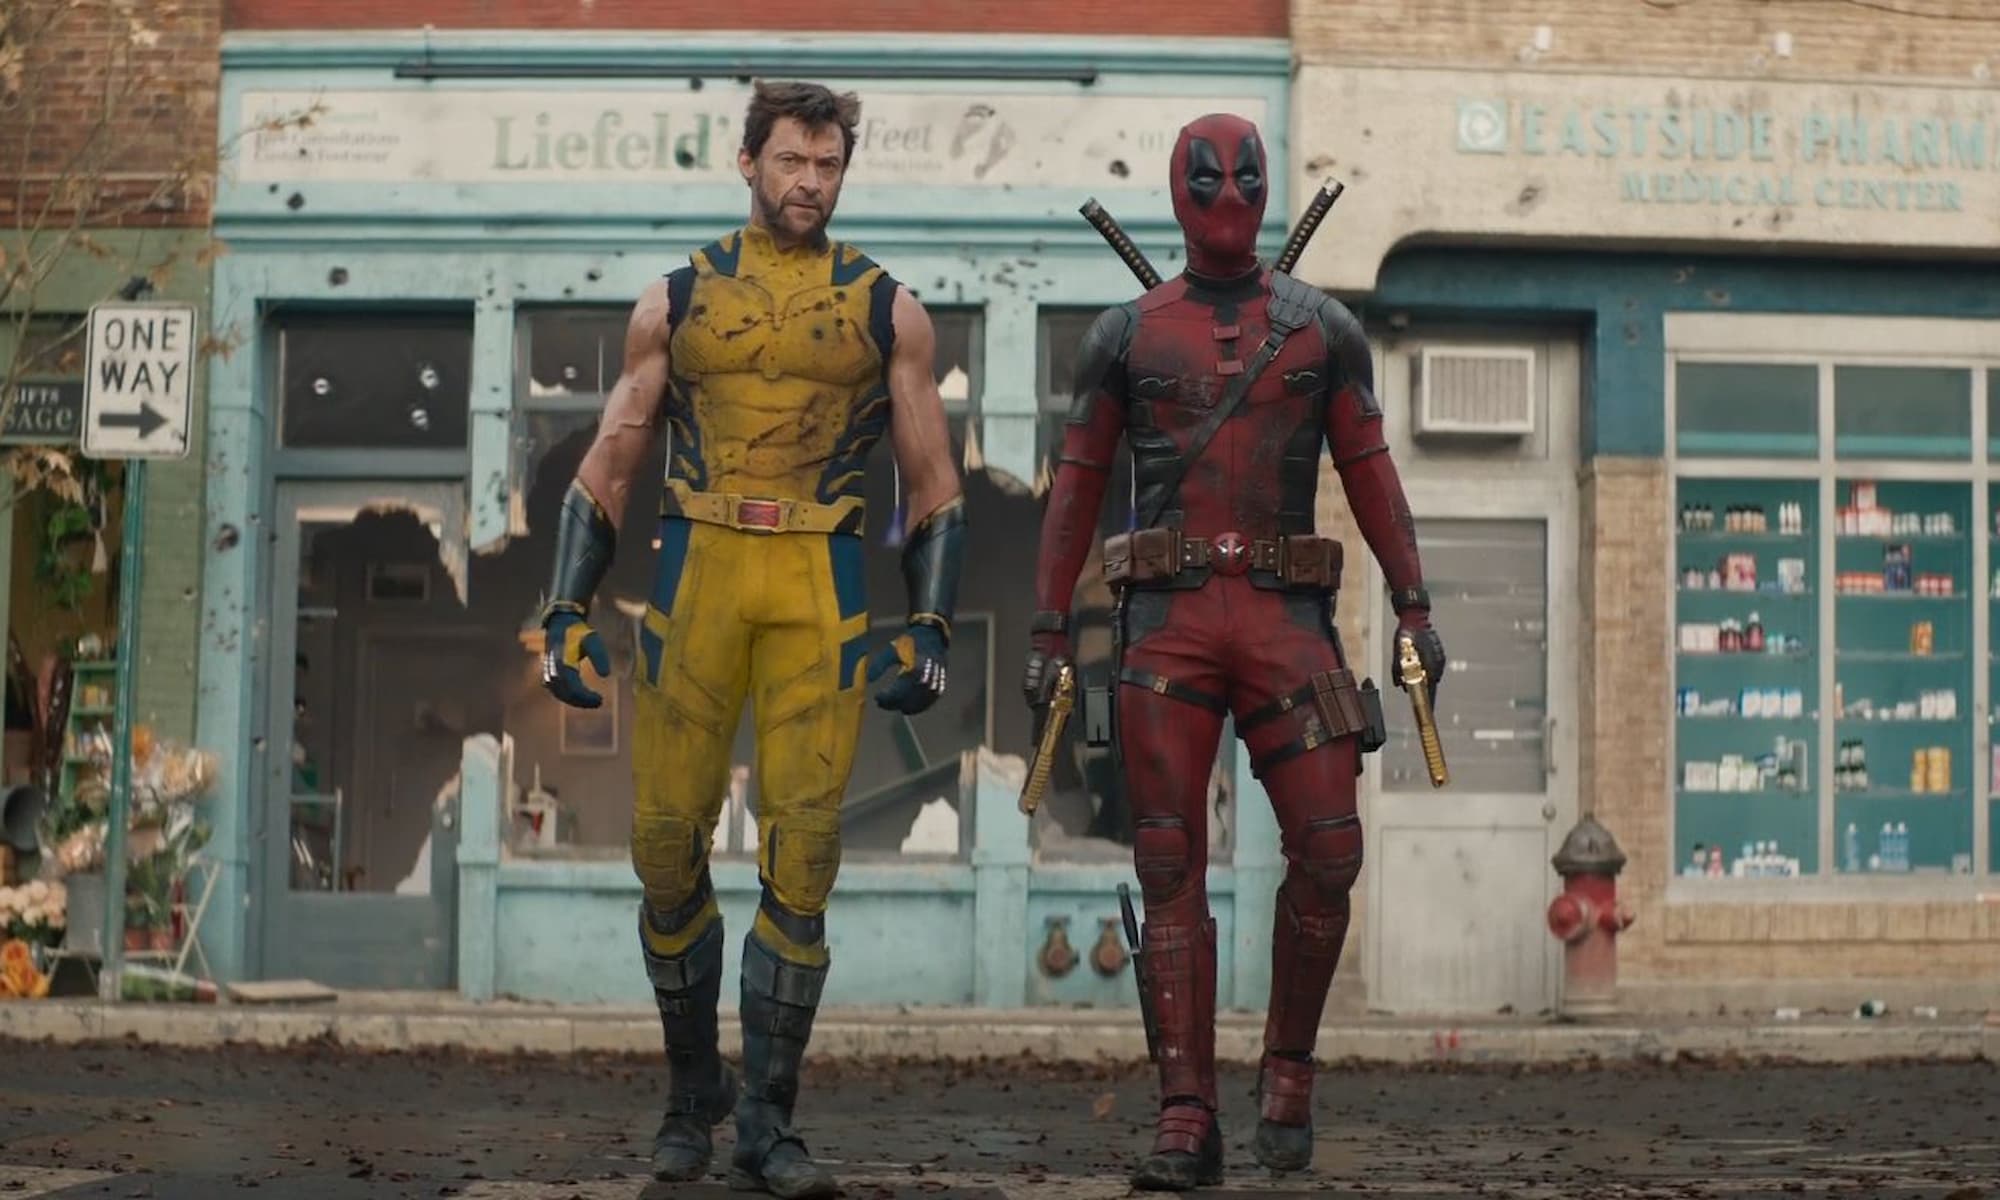 Deadpool & Wolverine screenshot with Liefeld's Just Feet in the background